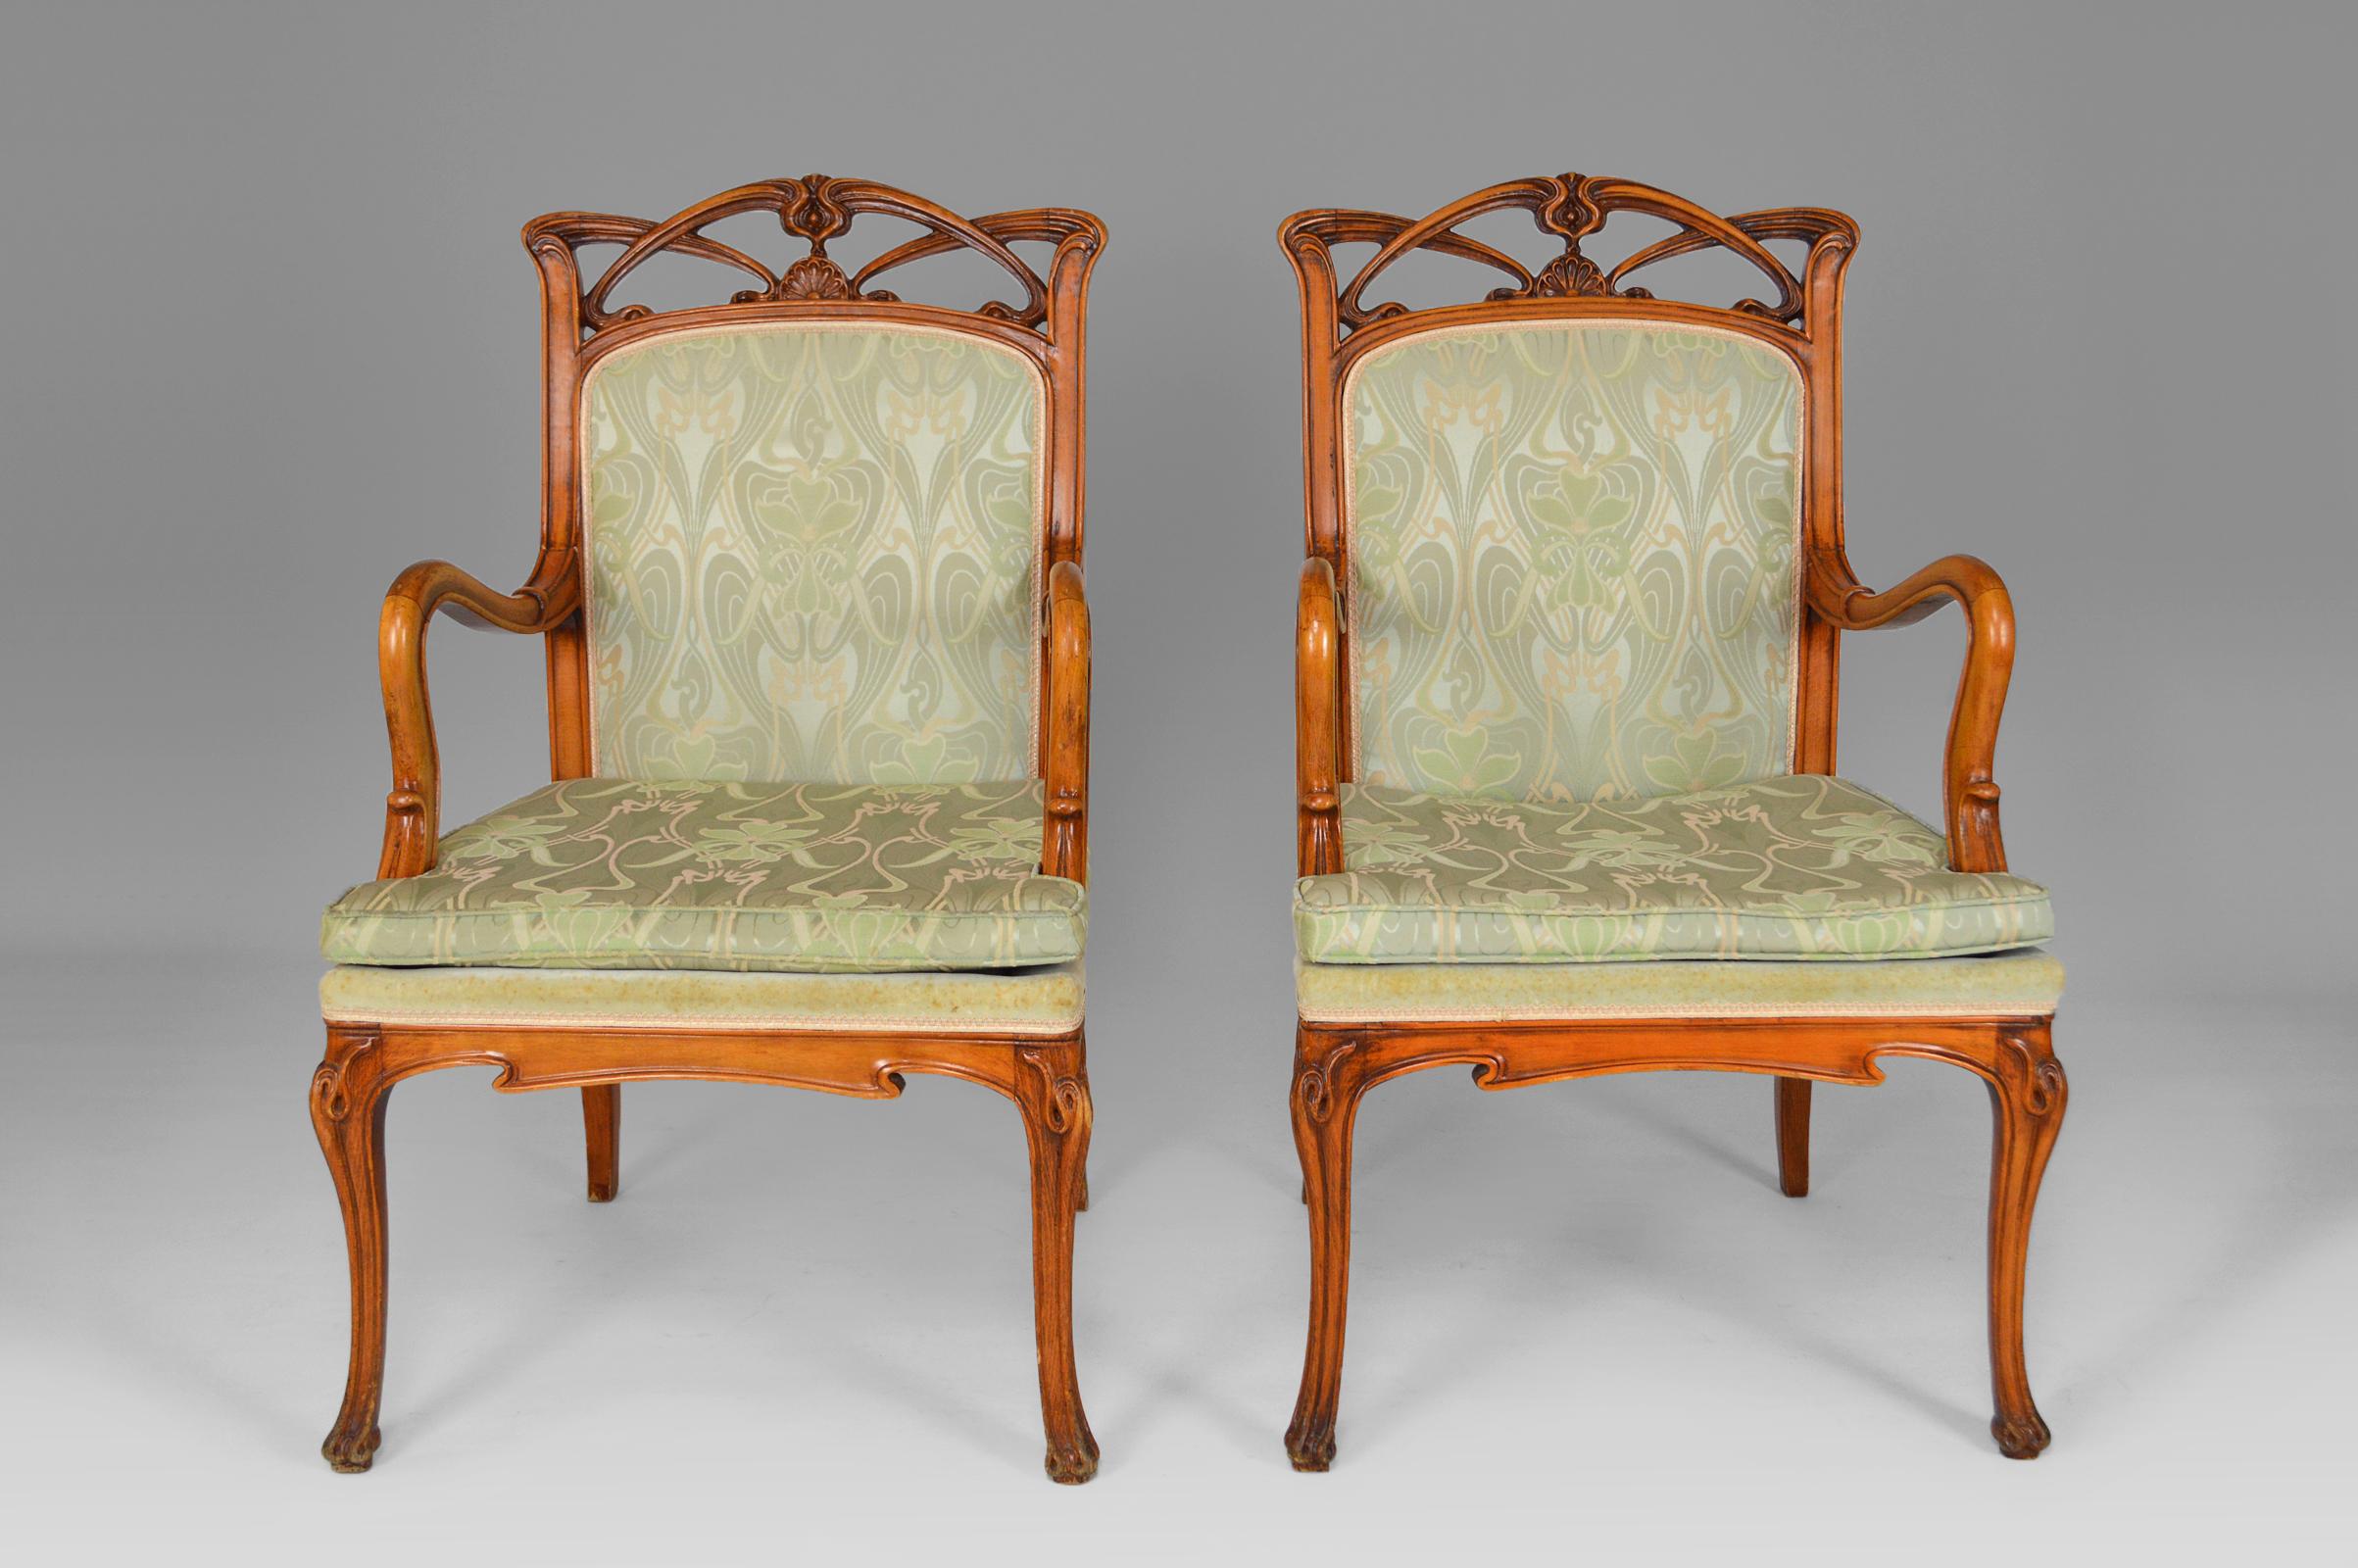 Fabric Art Nouveau Salon Set in Carved Wood on a Floral Theme, circa 1900 For Sale